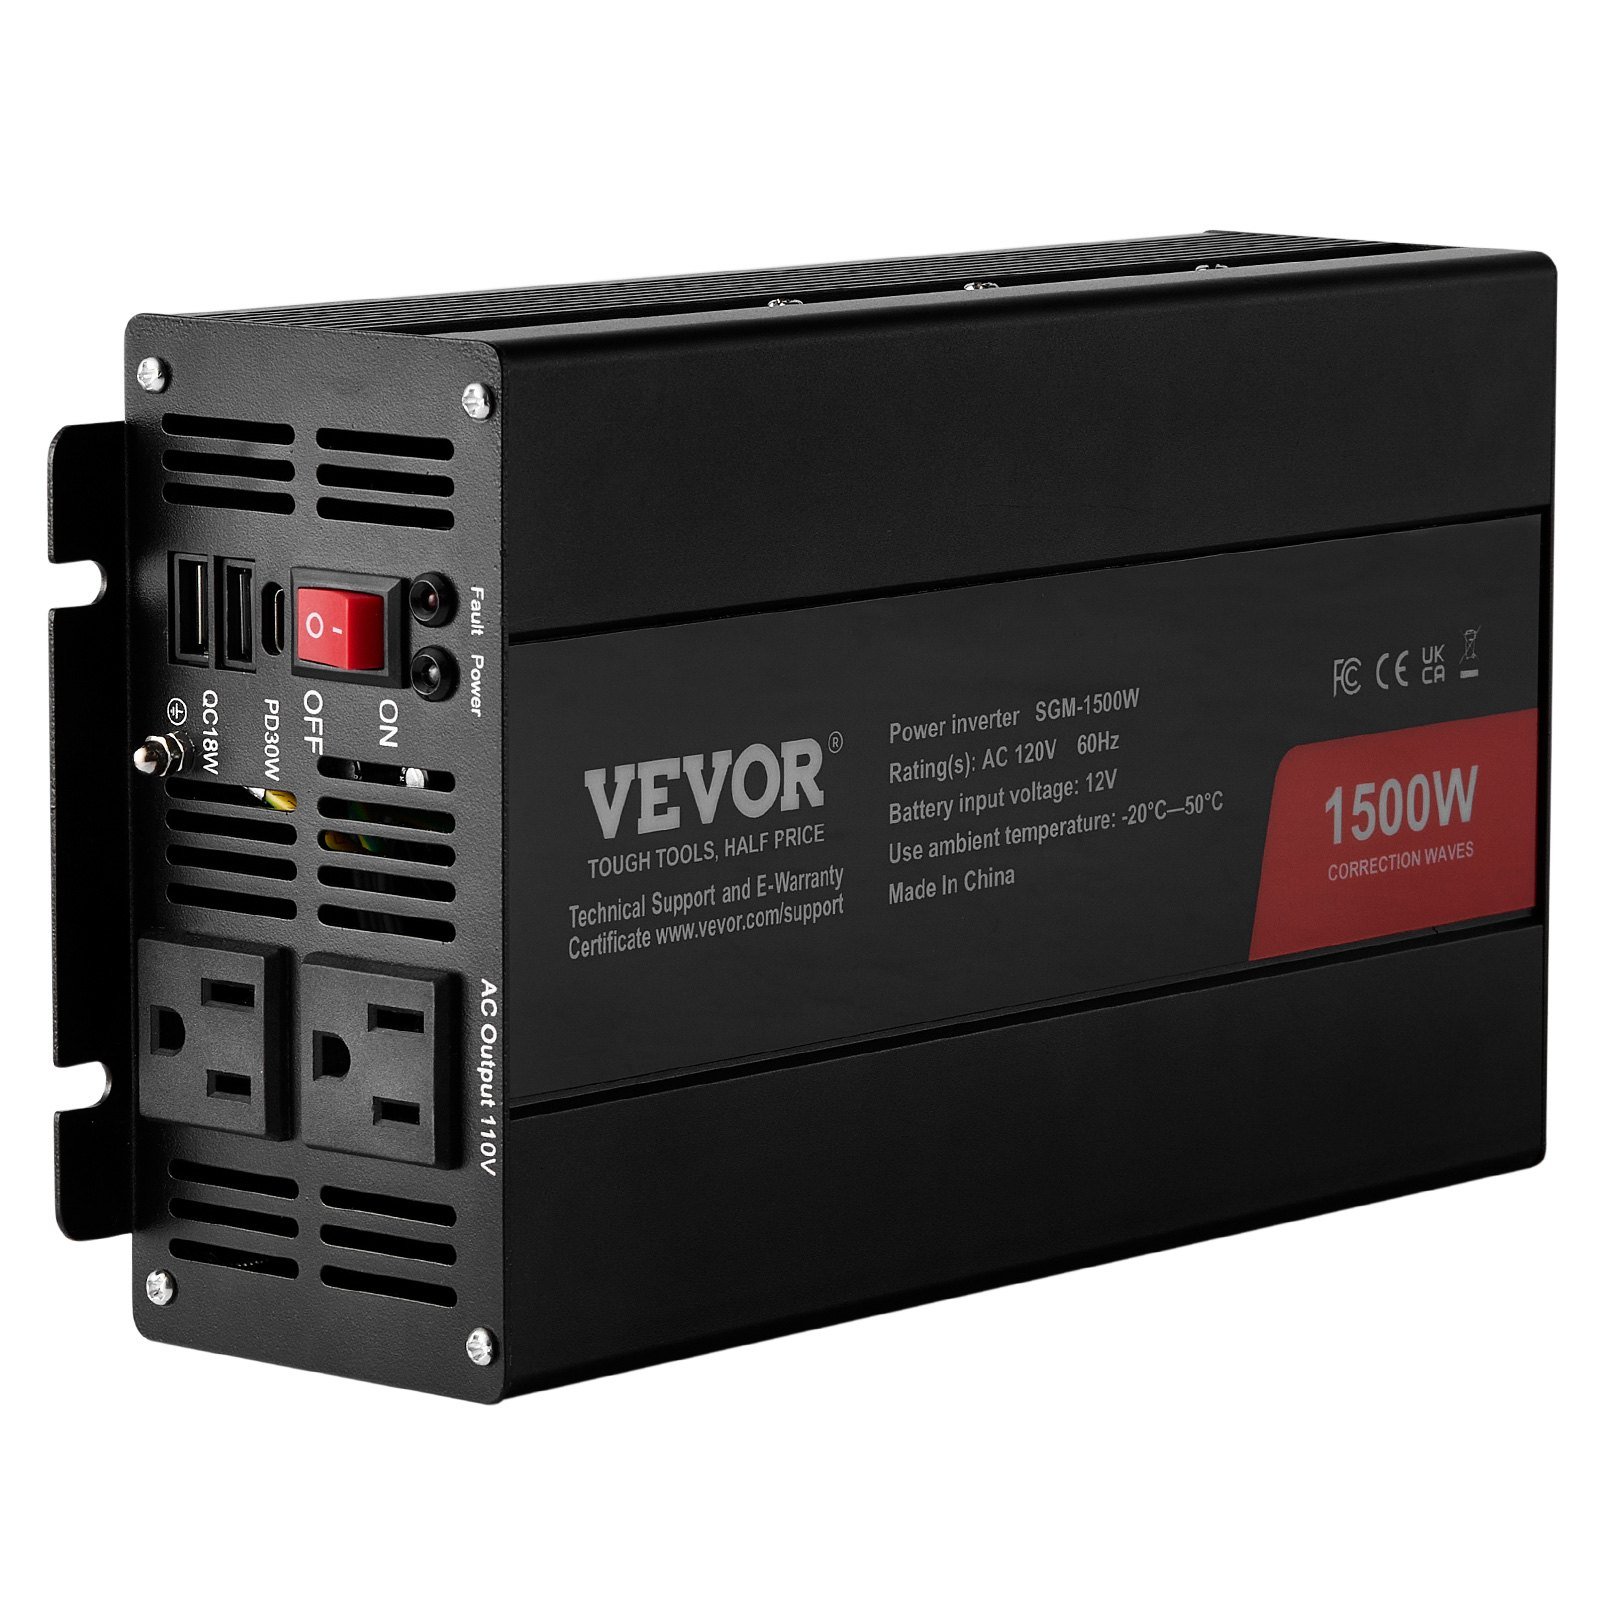 VEVOR Modified Sine Wave Inverter, 1500W, DC 12V to AC 120V Power Inverter with 2 AC Outlets 2 USB Port 1 Type-C Port 6 Spare Fuses, for Small Home Devices like Smartphone Laptop, CE FCC Certified, Goodies N Stuff